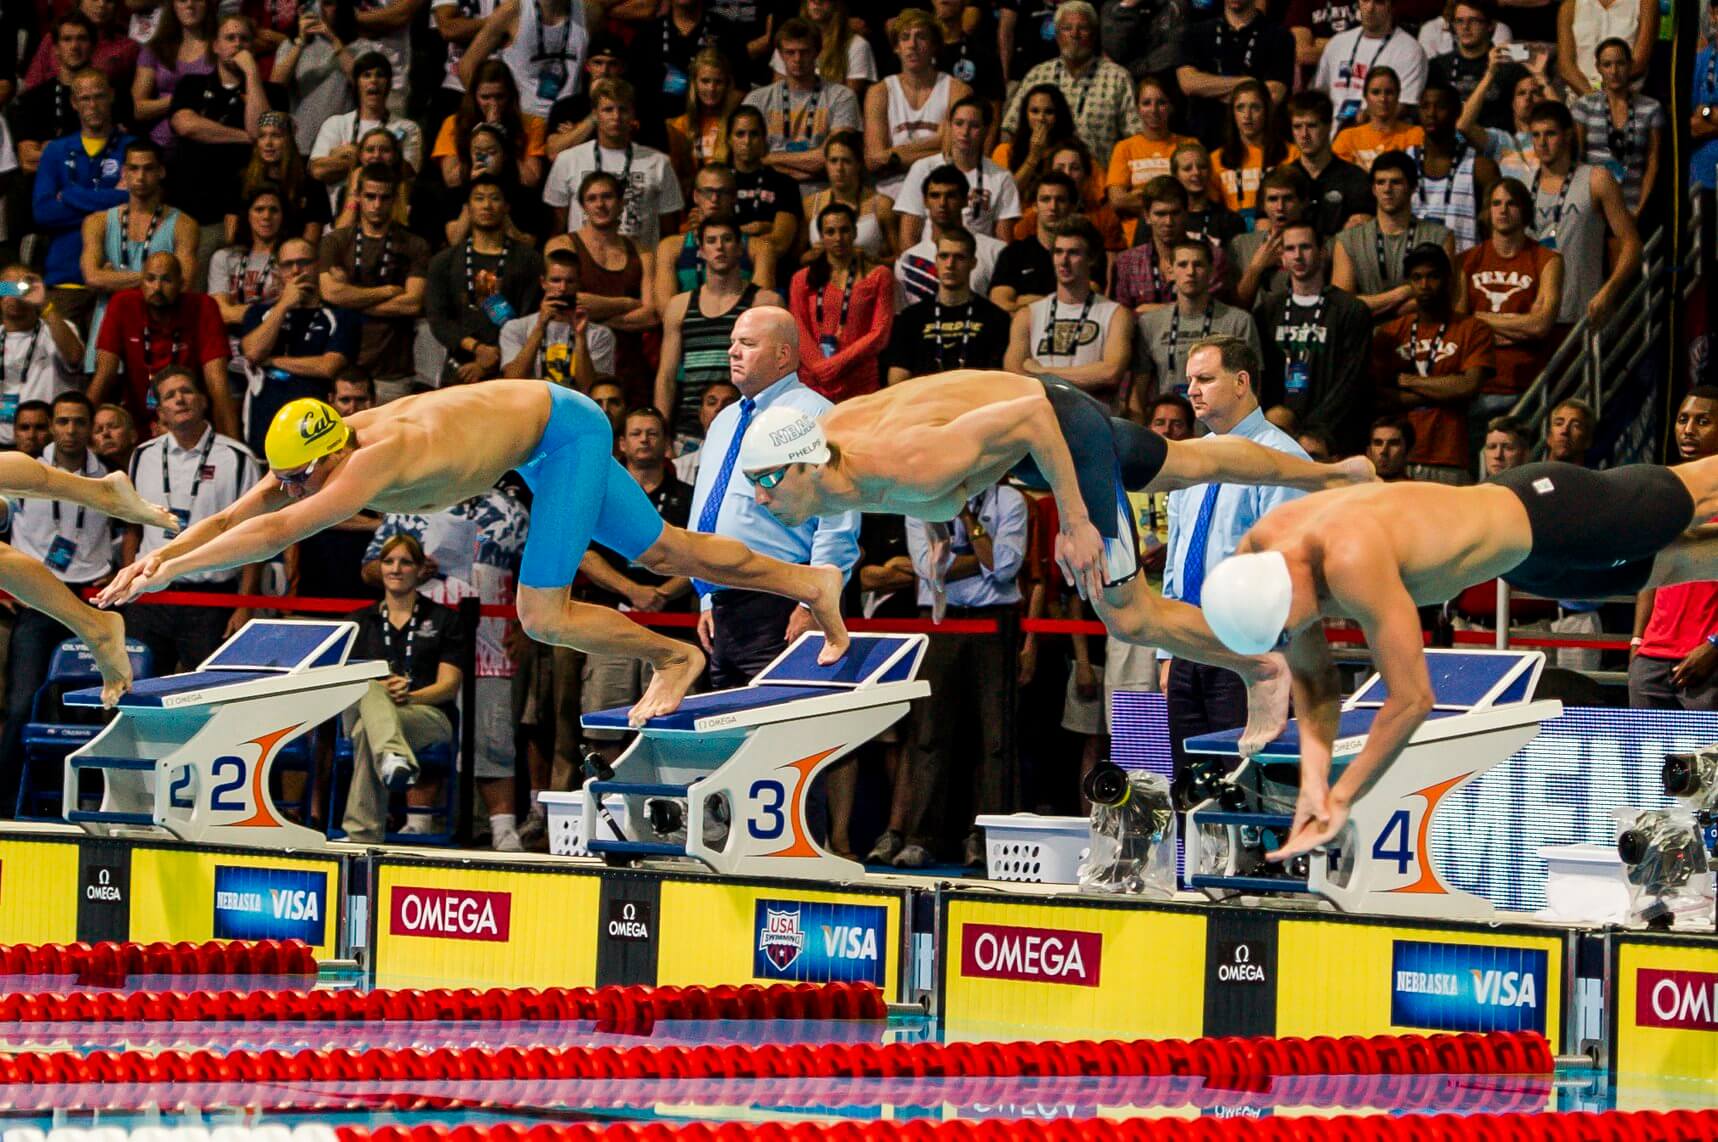 2016 U.S. Olympic Swimming Trials Cuts Too Fast Or Too Slow? (Poll of